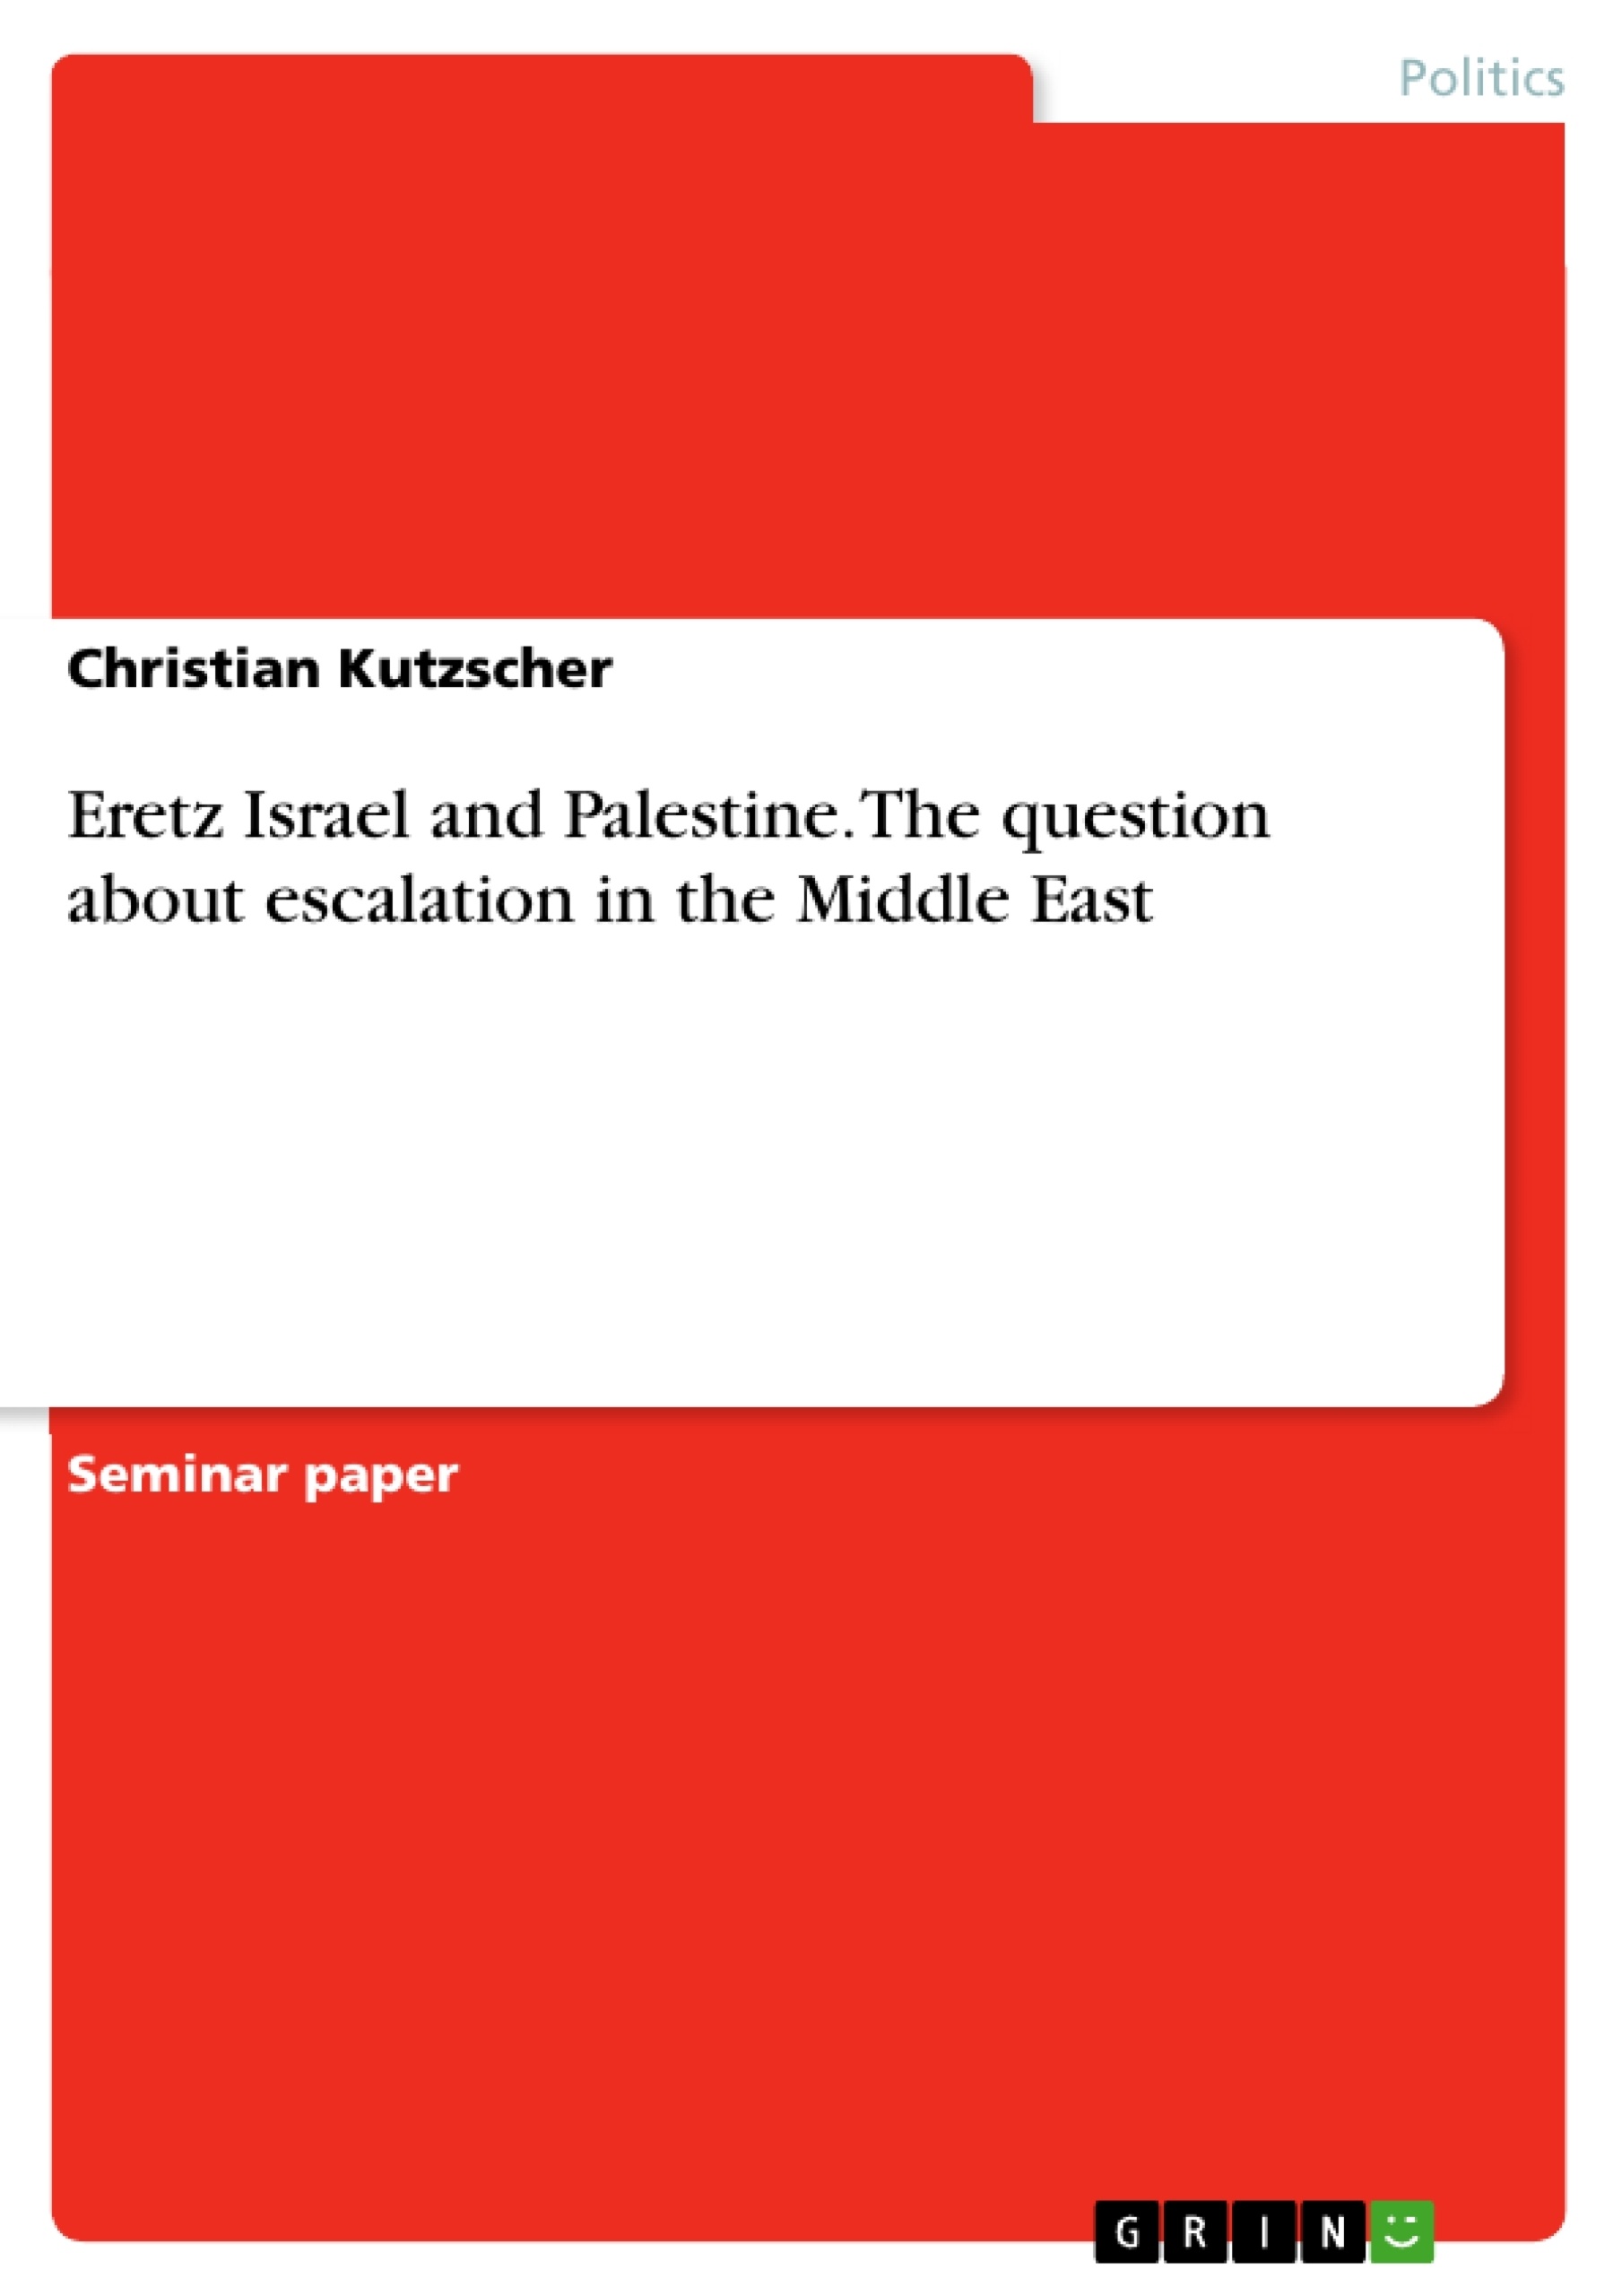 Título: Eretz Israel and Palestine. The question about escalation in the Middle East